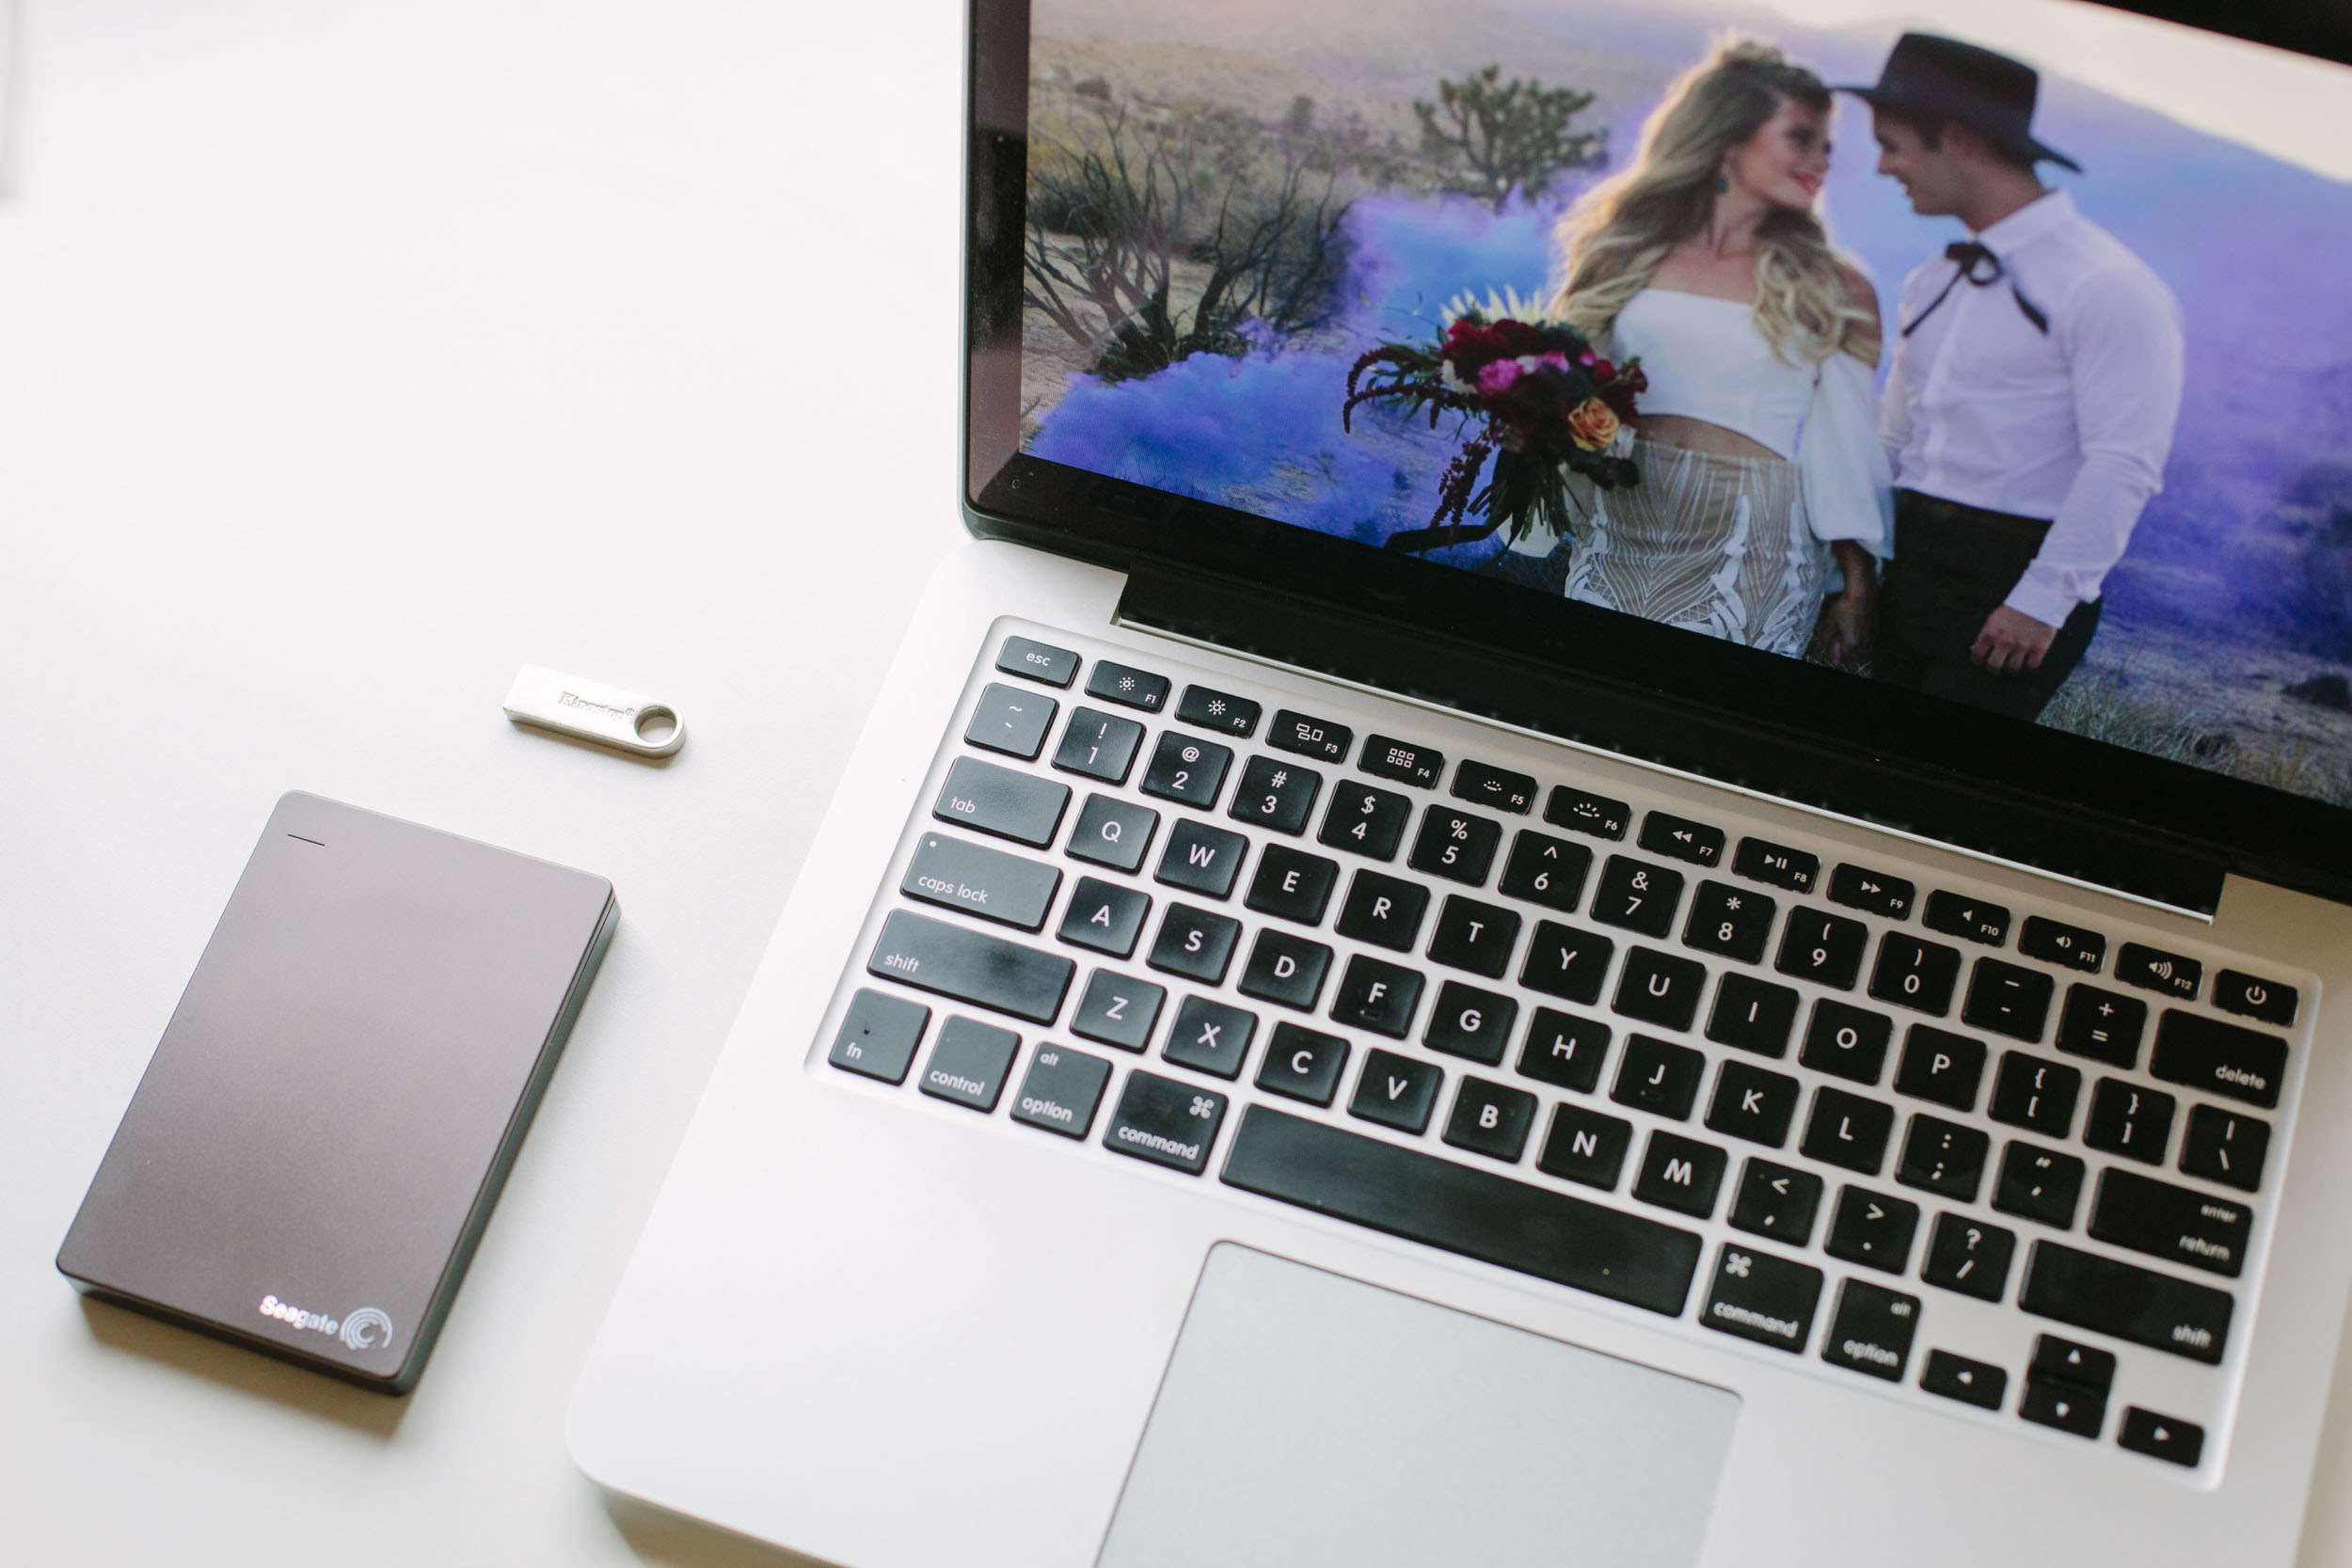 Photo of a wedding video on a laptop with an external hard drive and flash drive.